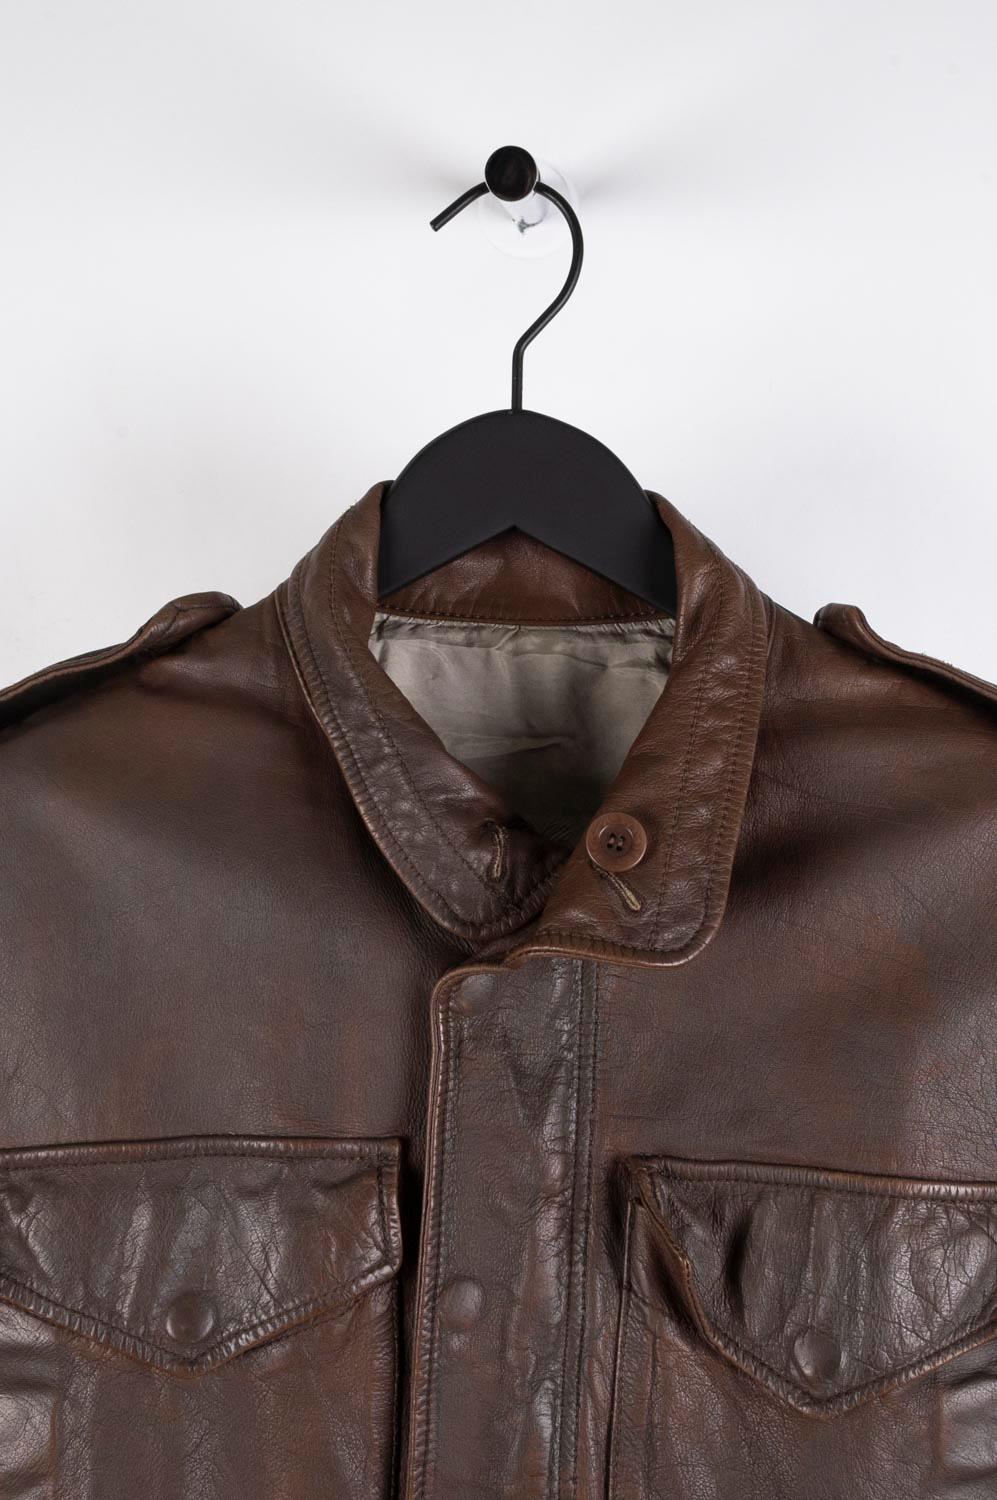 Item for sale is 100% genuine Rick Owens Leather Men Jacket 
Color: Brown
(An actual color may a bit vary due to individual computer screen interpretation)
Material: 100% buffalo
Tag size: M
This jacket is great quality item. Rate 8.5 of 10, very